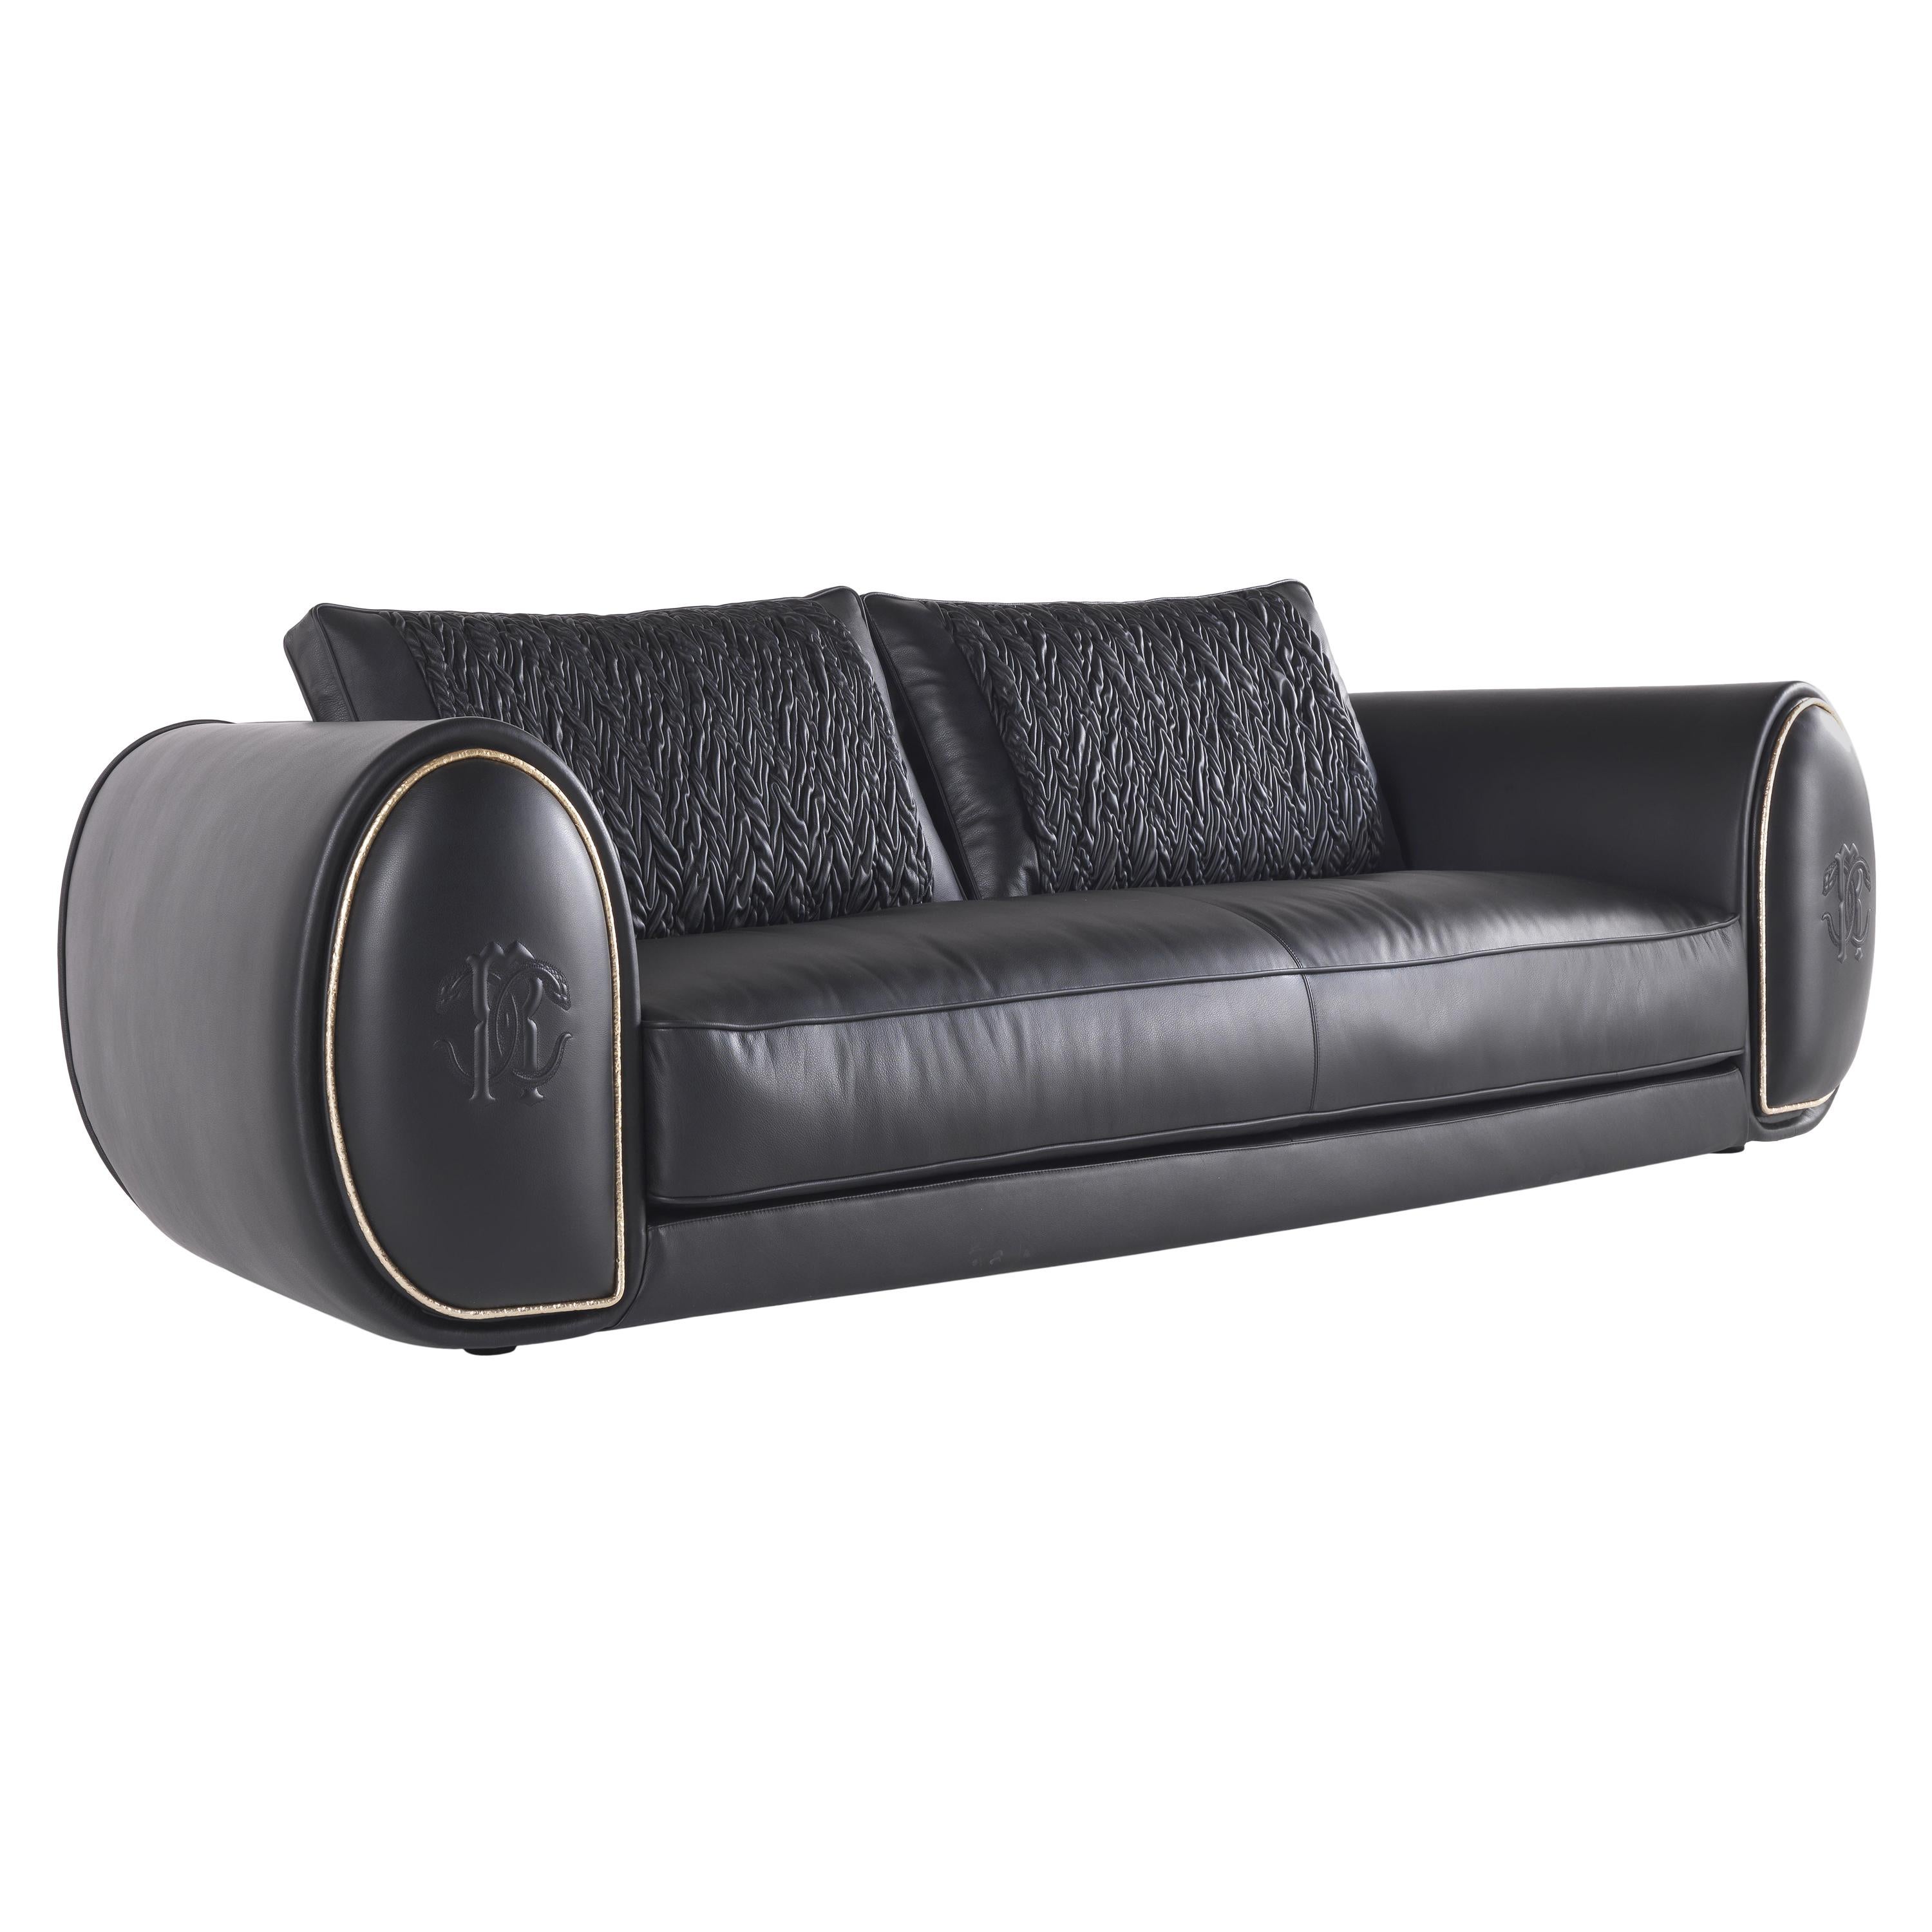 Bold.2 3-seater sofa structure in poplar wood, foam and feather. Upholstery in leather CAT. B Touch COL. Black With “Spiga’’ Quilting on back structural cushions. Metal details in brass glossy gold finishing. Stitched RC Snake logo on armrests.